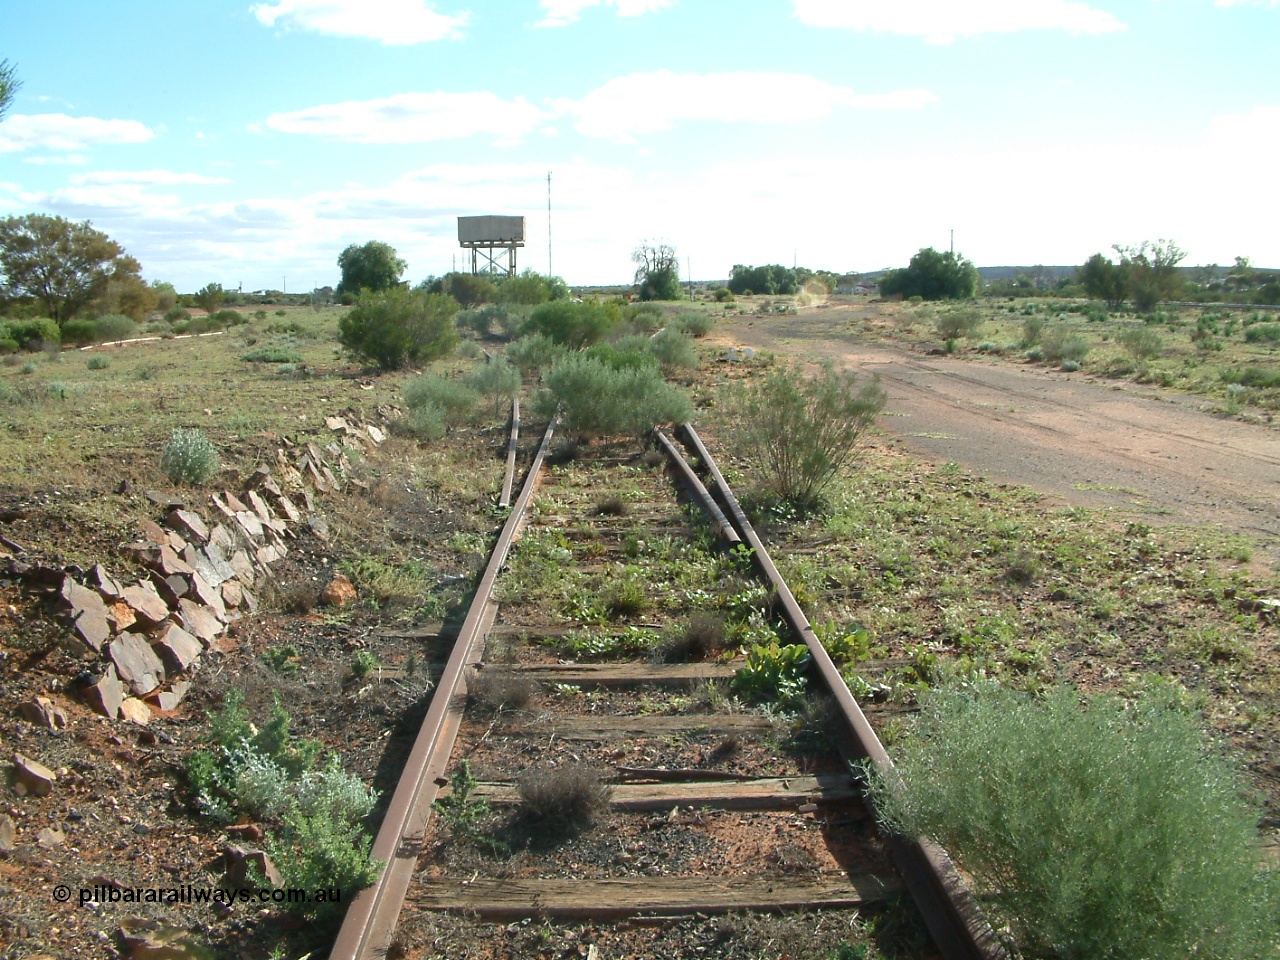 030415 155301
Tarcoola, at the 504.5 km, looking west, removed points for No. 1 Water Road joining the Camp Train Road. Town is to the far north west, and the mainline is on the right. [url=https://goo.gl/maps/hwYG6SvtzrBQZfSMA]GeoData location[/url]. 15th April 2003.
